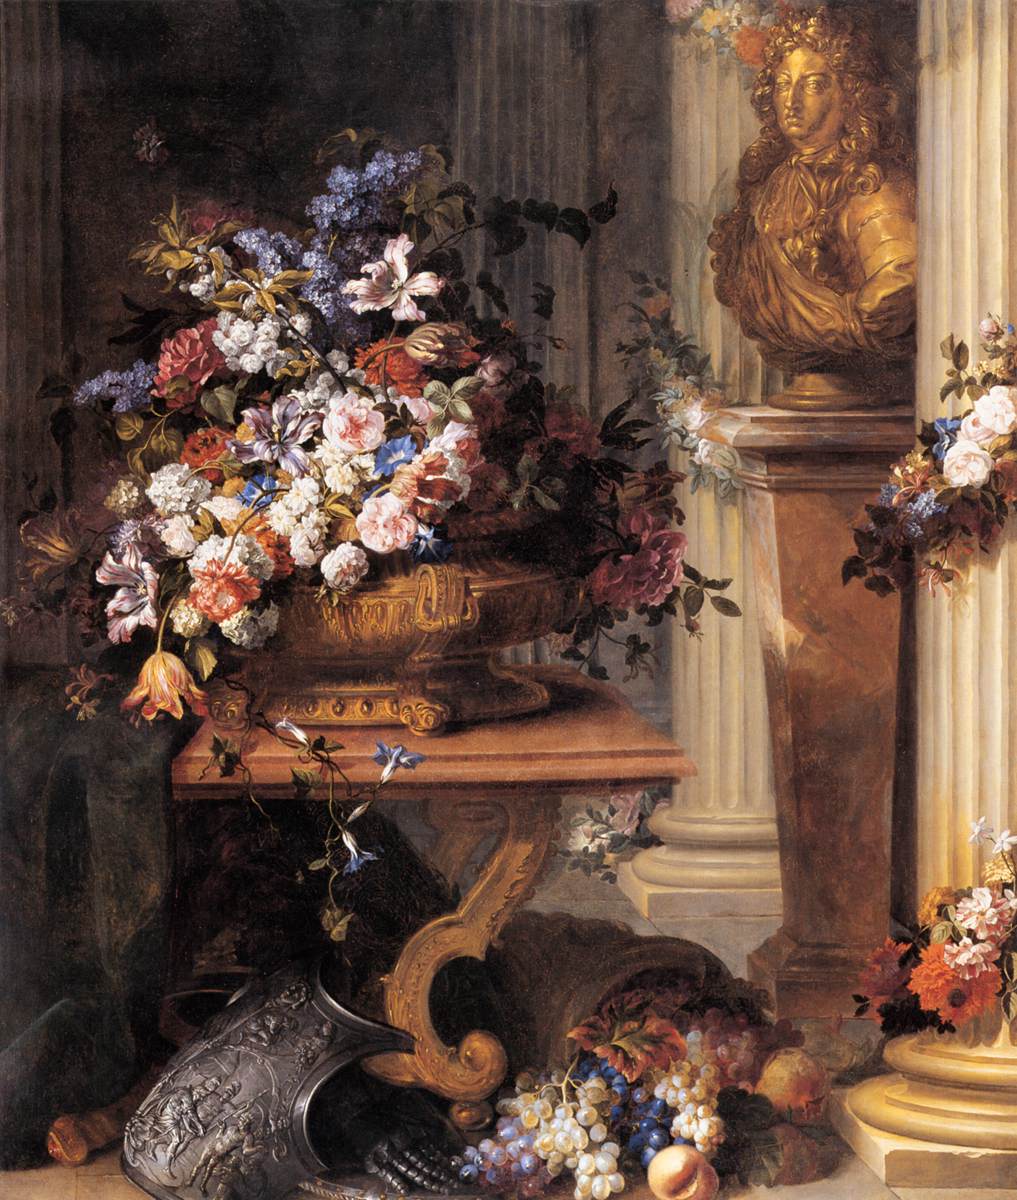 Flowers in a Gold Vase, Bust of Louis XIV, Horn of Plenty and Armor